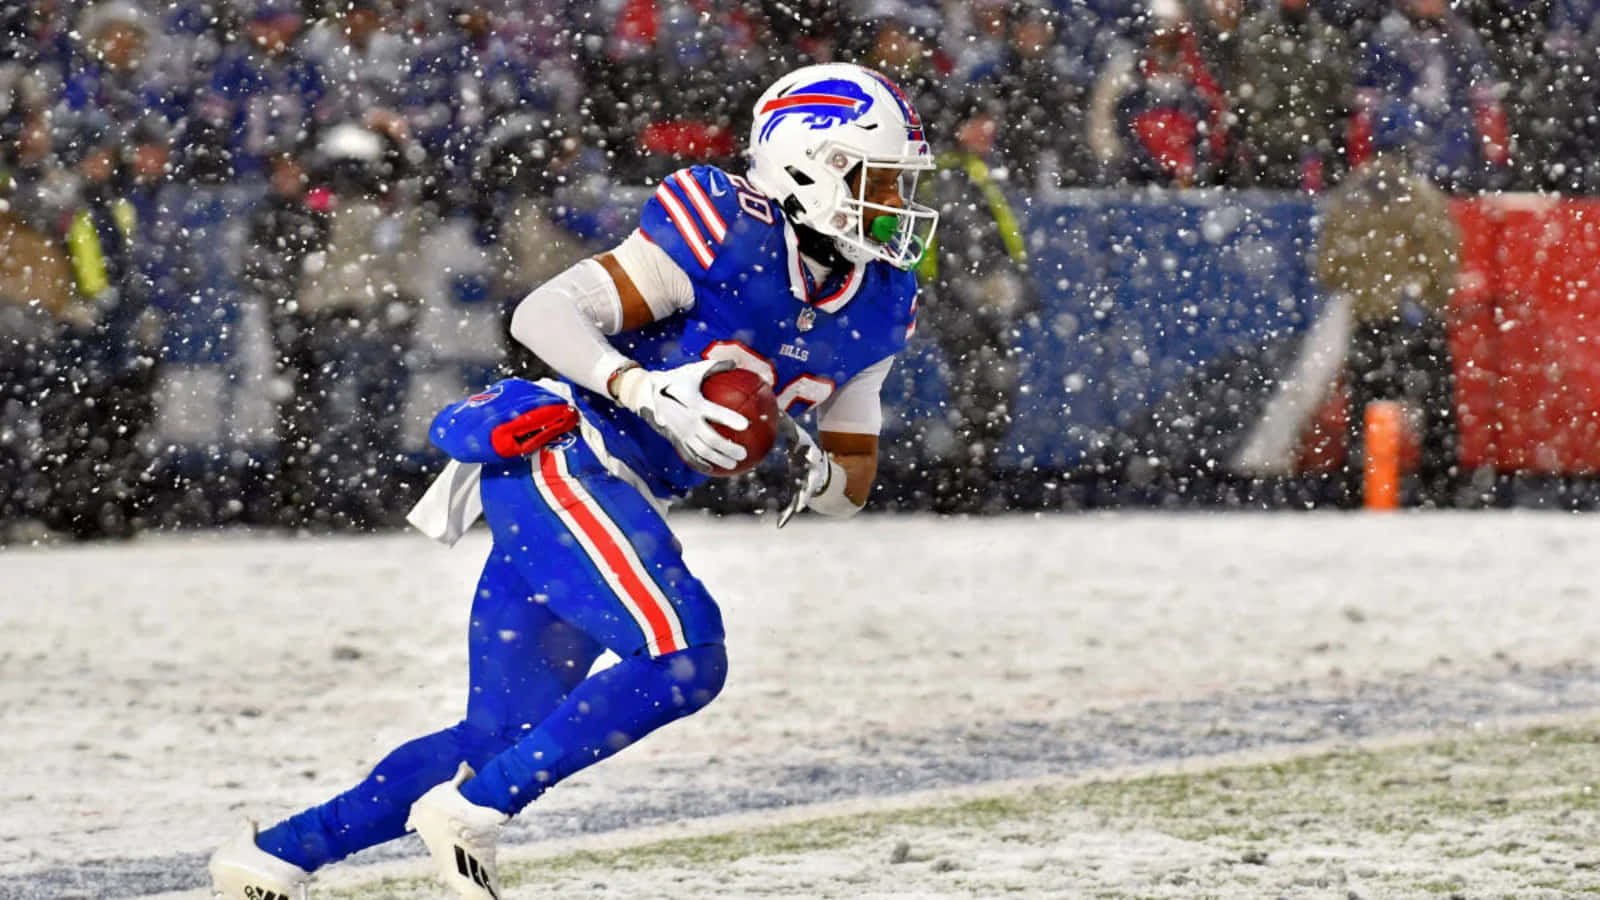 Football Player Snowy Game Wallpaper